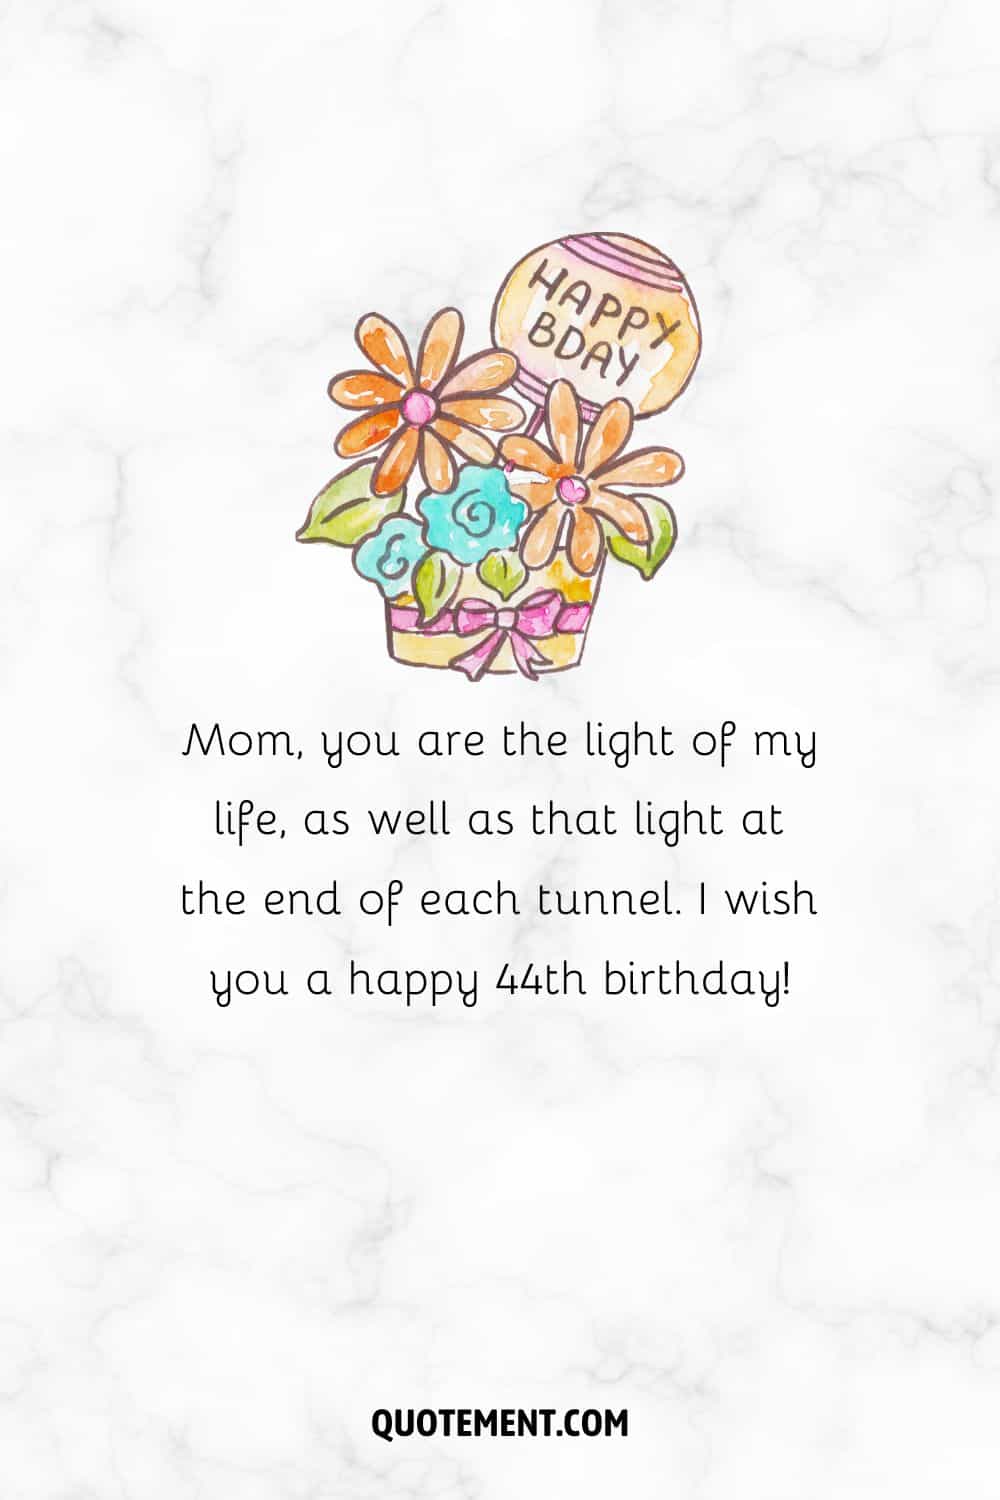 Mom, you are the light of my life, as well as that light at the end of each tunnel. 